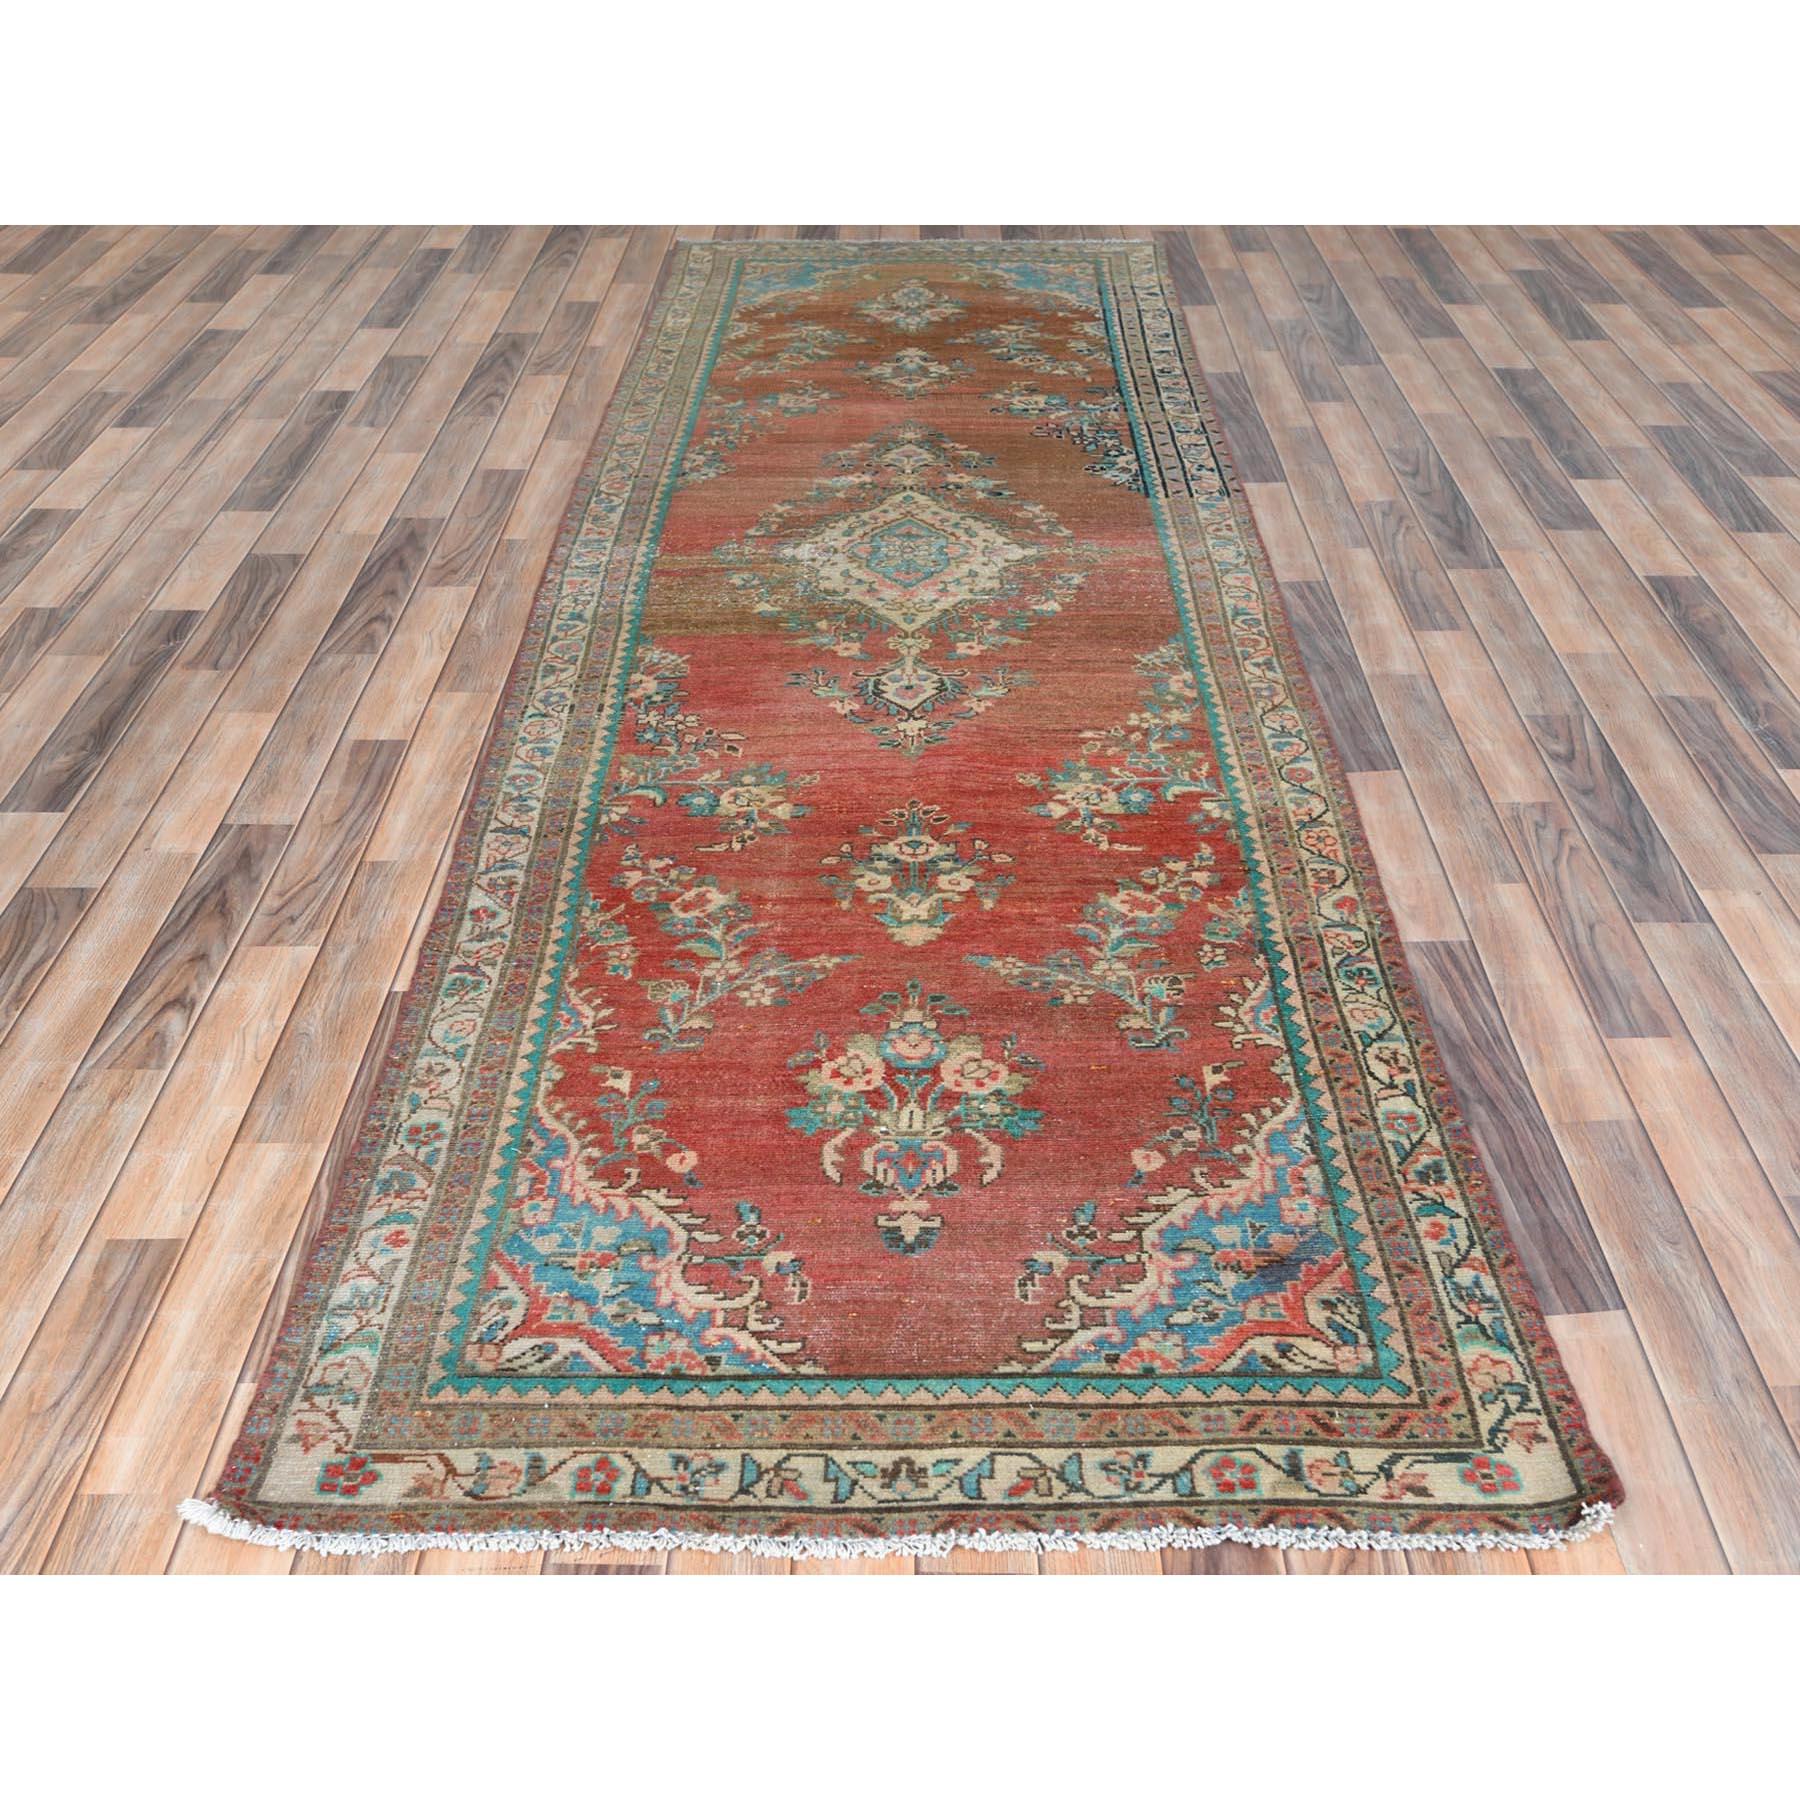 This fabulous Hand-Knotted carpet has been created and designed for extra strength and durability. This rug has been handcrafted for weeks in the traditional method that is used to make
Exact rug size in feet and inches : 3'9